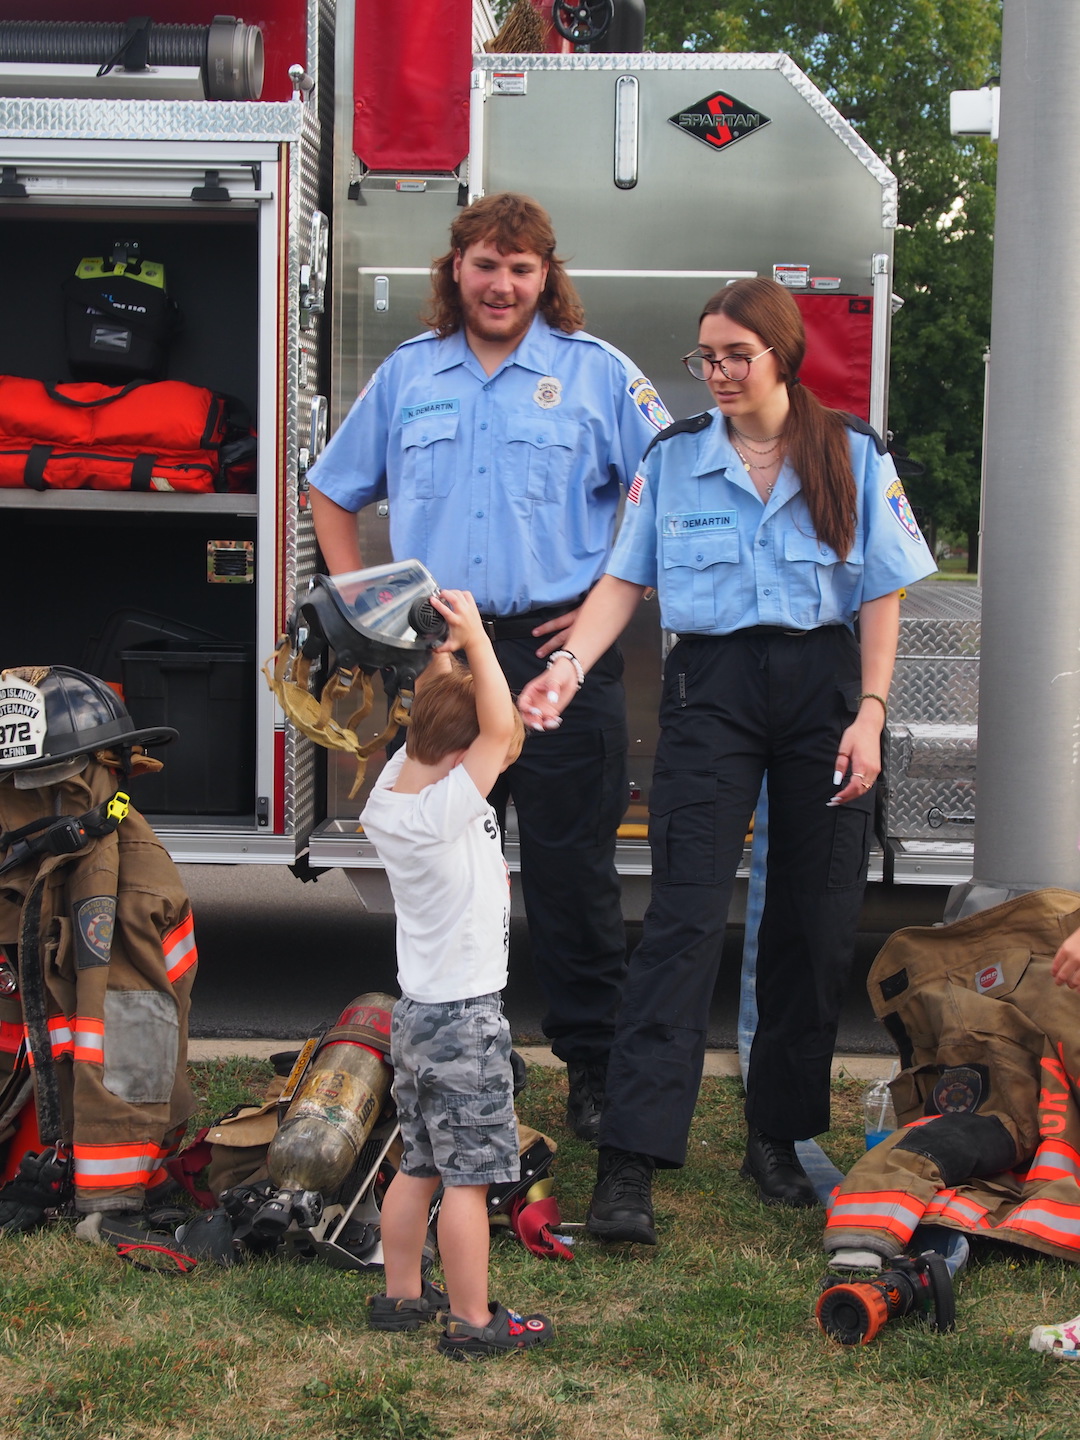 Volunteers with the Grand Island Fire Company demonstrate the truck for a young visitor.